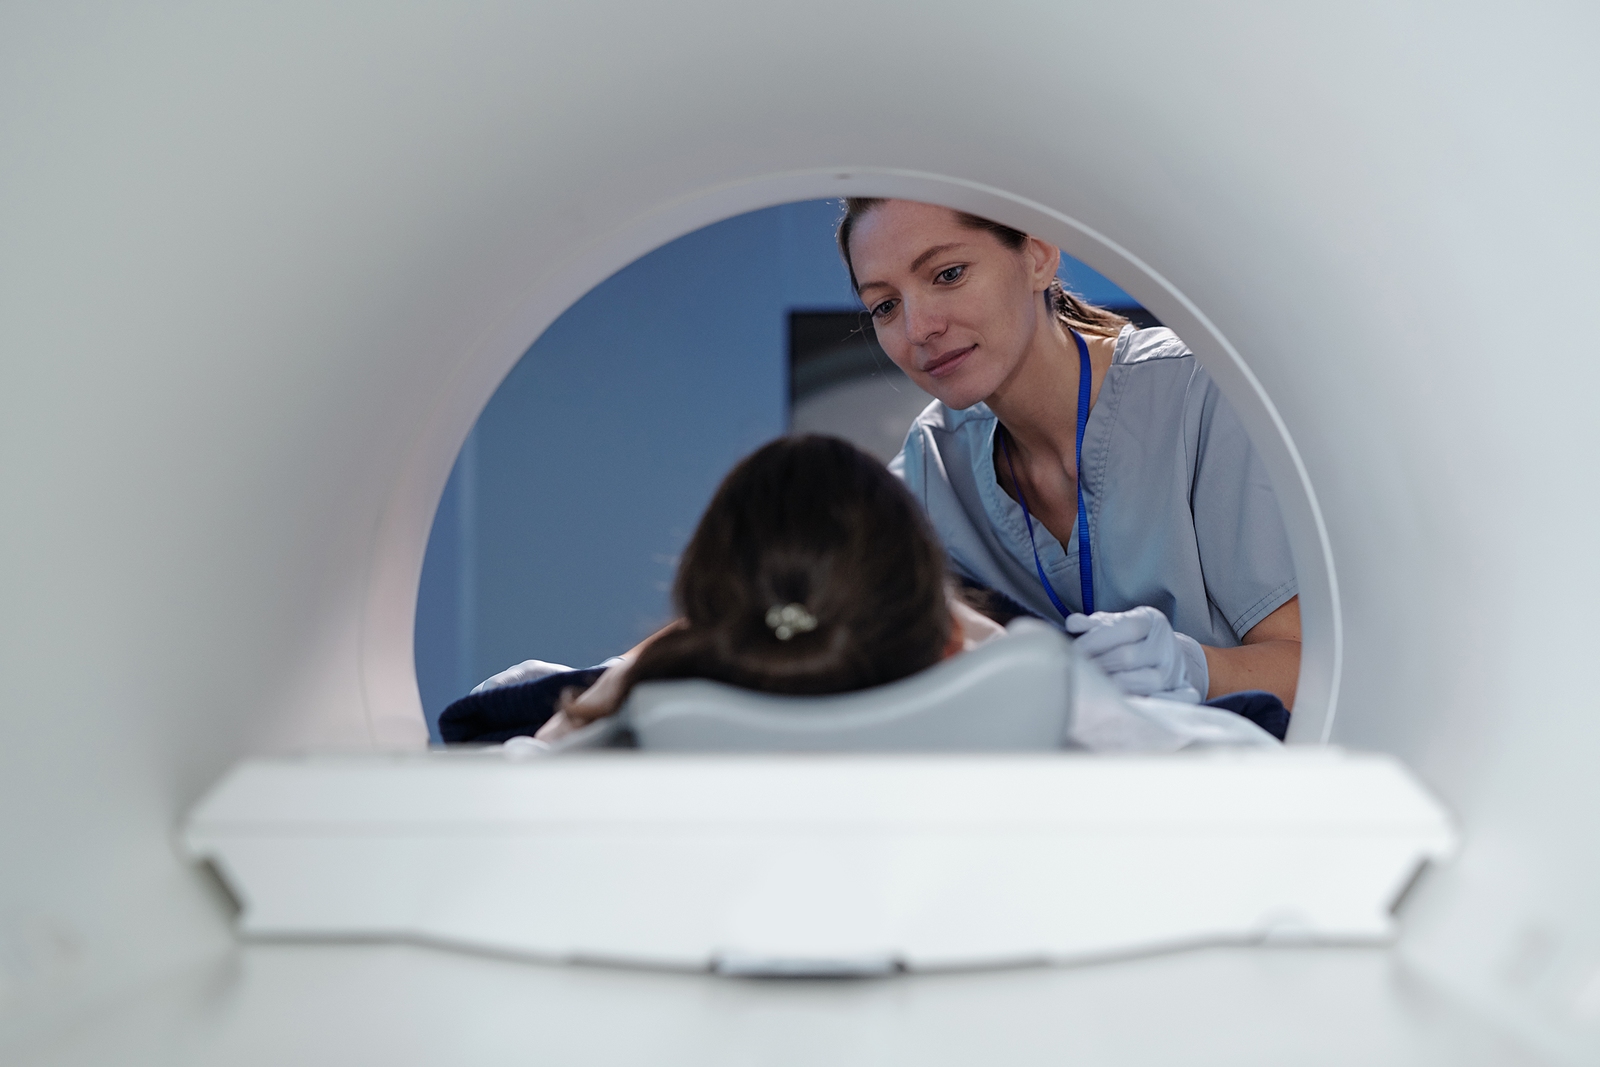 Is it Time to Take your Imaging Career on The Road?